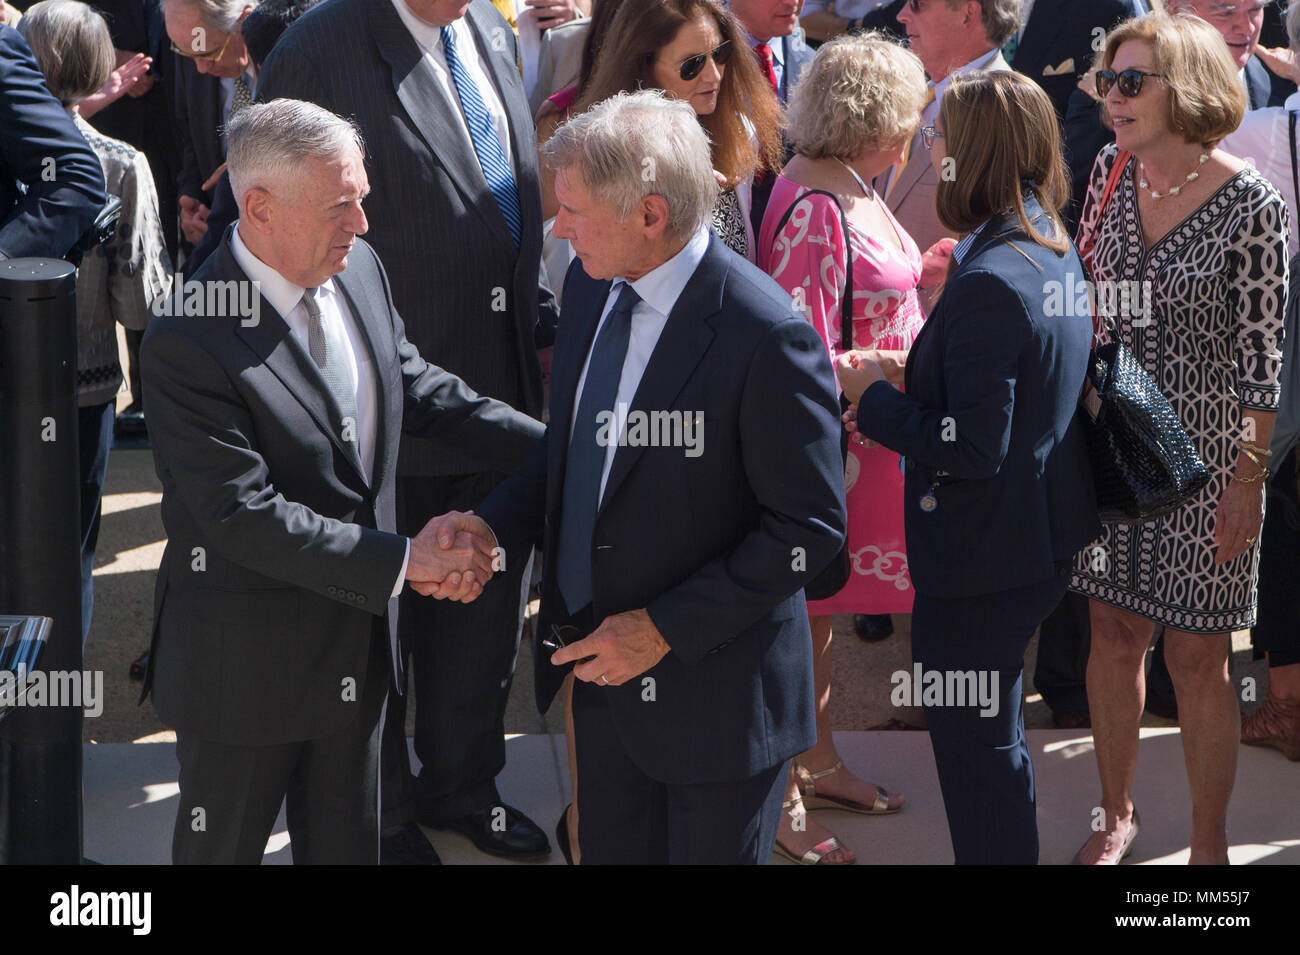 Defense Secretary Jim Mattis shakes hands with Actor Harrison Ford following the formal swearing in of Secretary of the Navy Richard V. Spencer at the Pentagon in Washington, D.C., Sep. 7, 2017. (DOD photo by Army Sgt. Amber I. Smith) Stock Photo